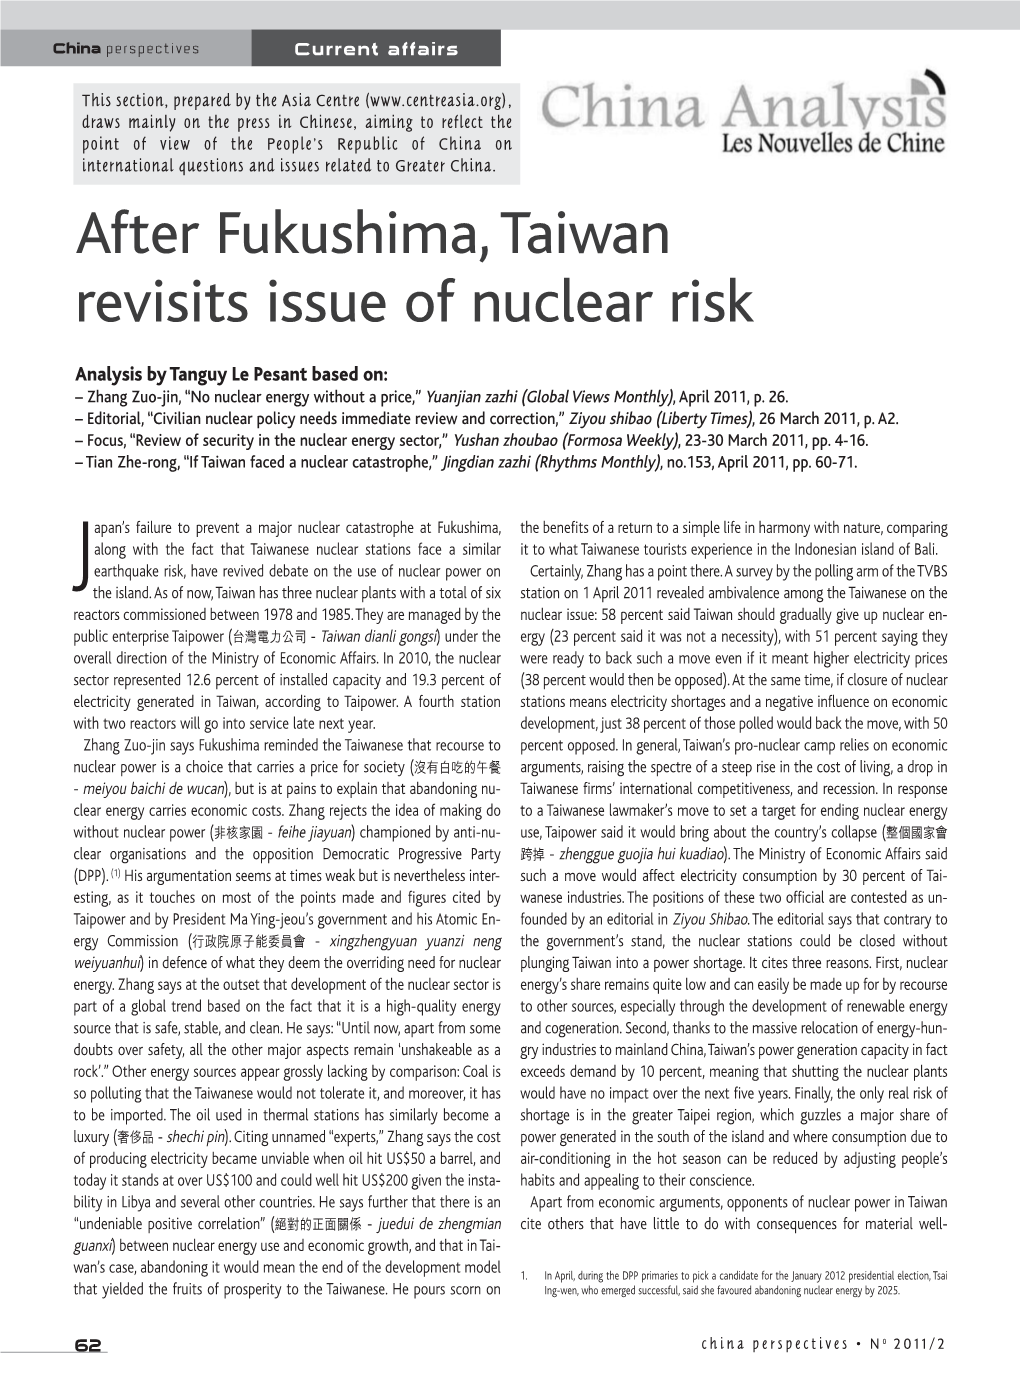 After Fukushima, Taiwan Revisits Issue of Nuclear Risk